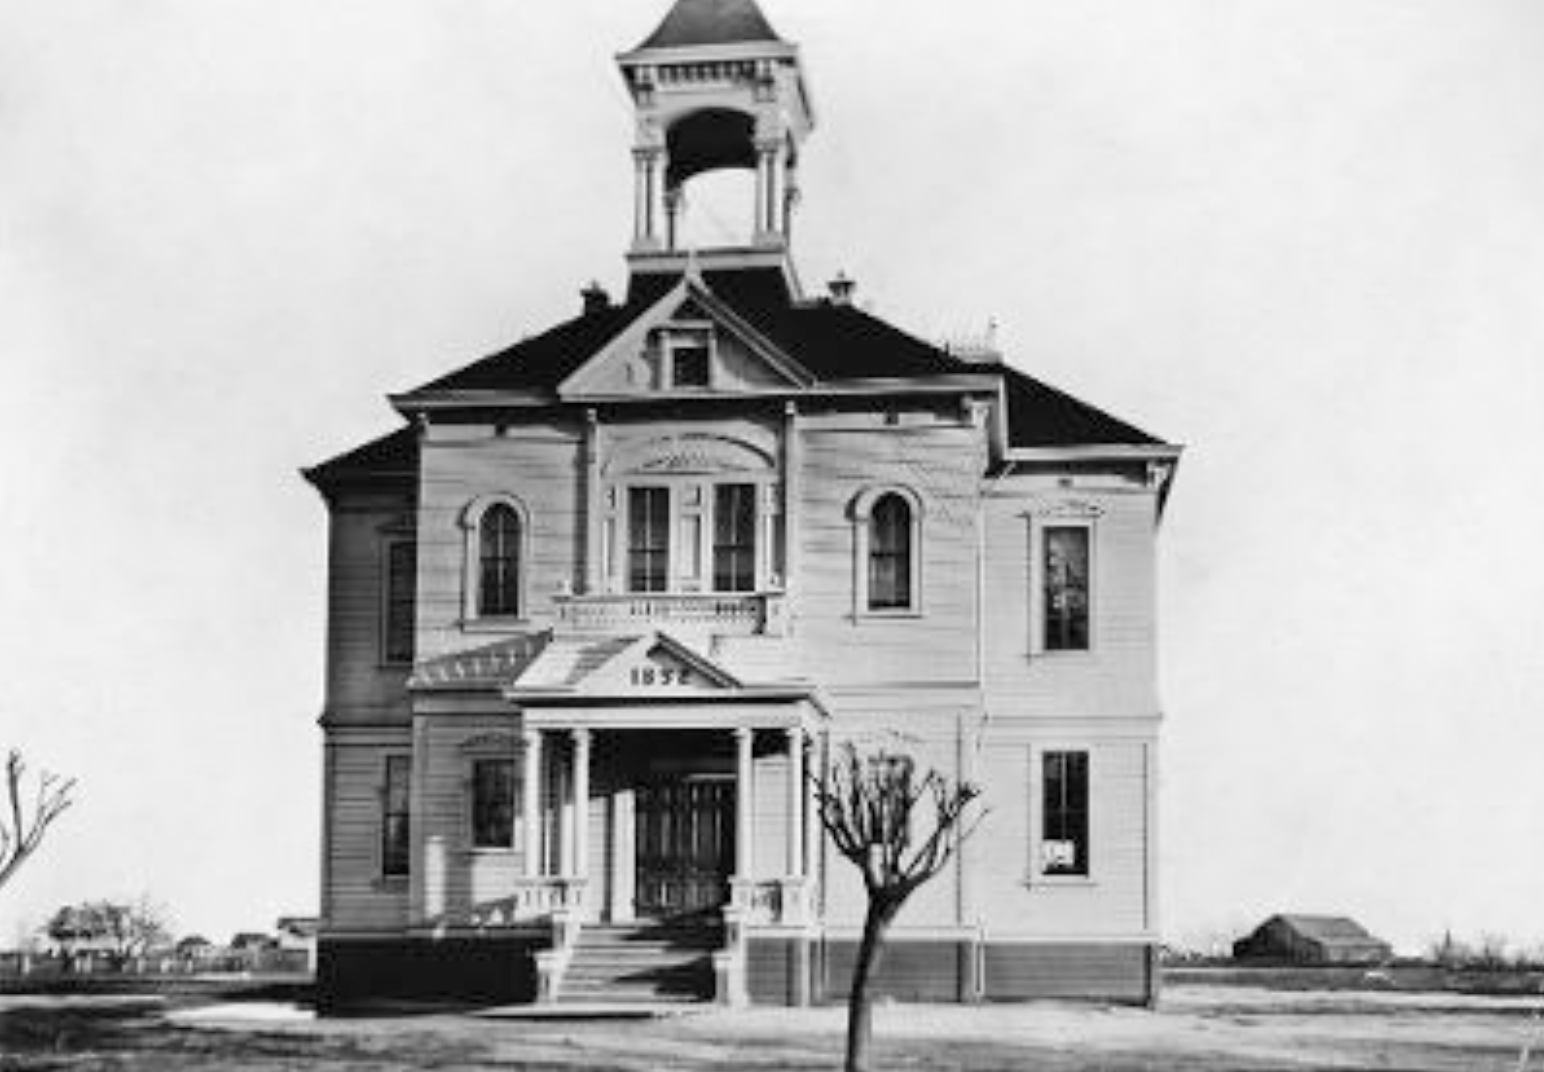 The upper floor of Westside School on Sixth Street served as home for Madera High School until 1903.